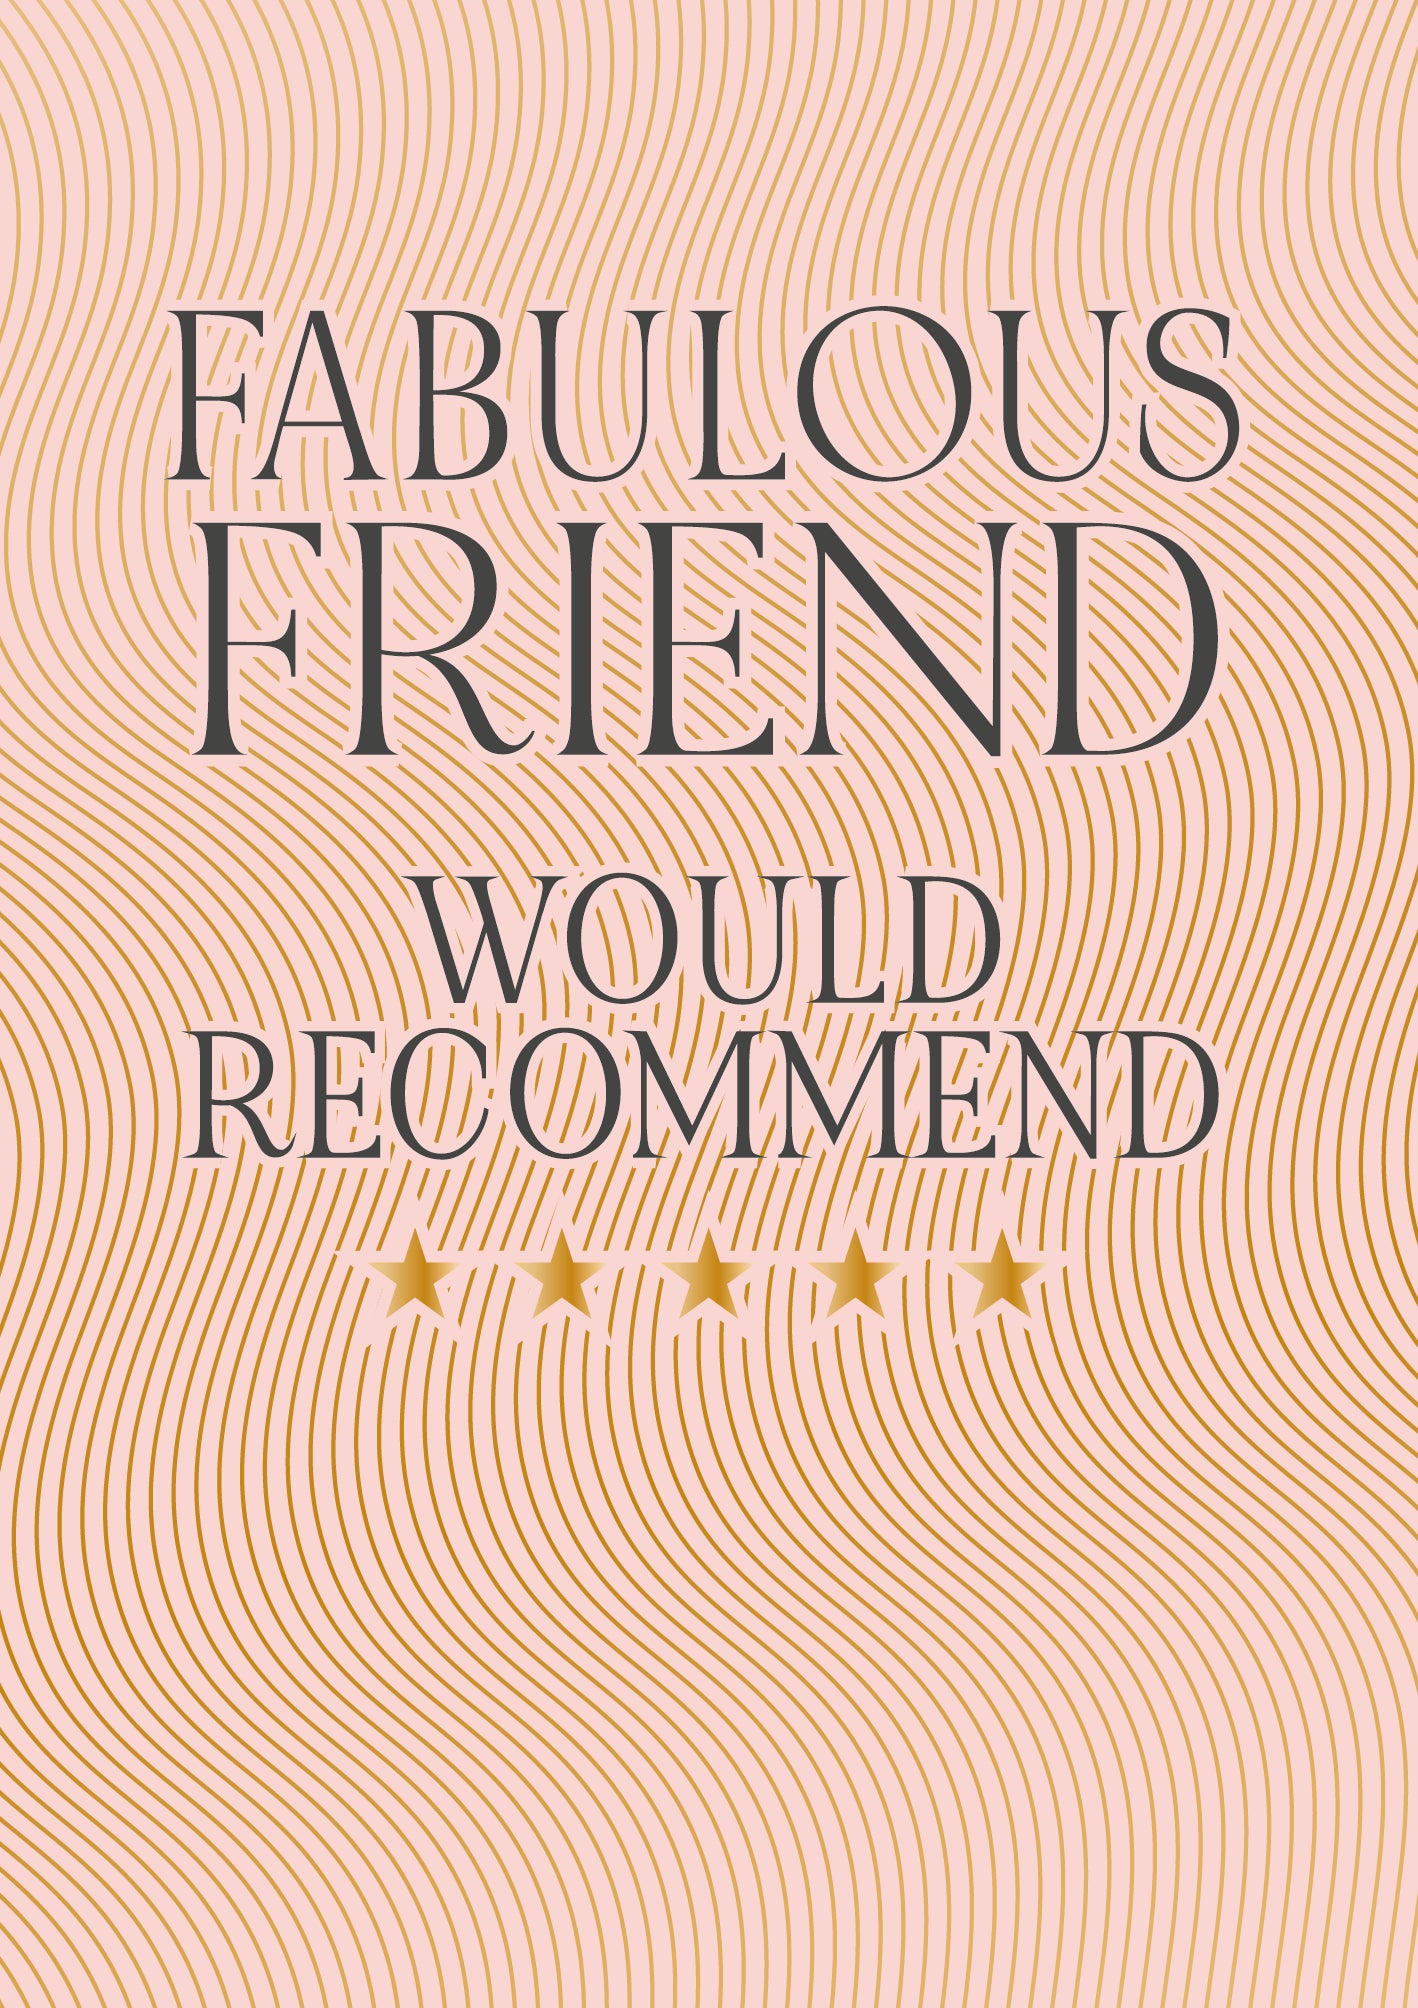 Fabulous Friend Would Recommend Funny Card from Penny Black